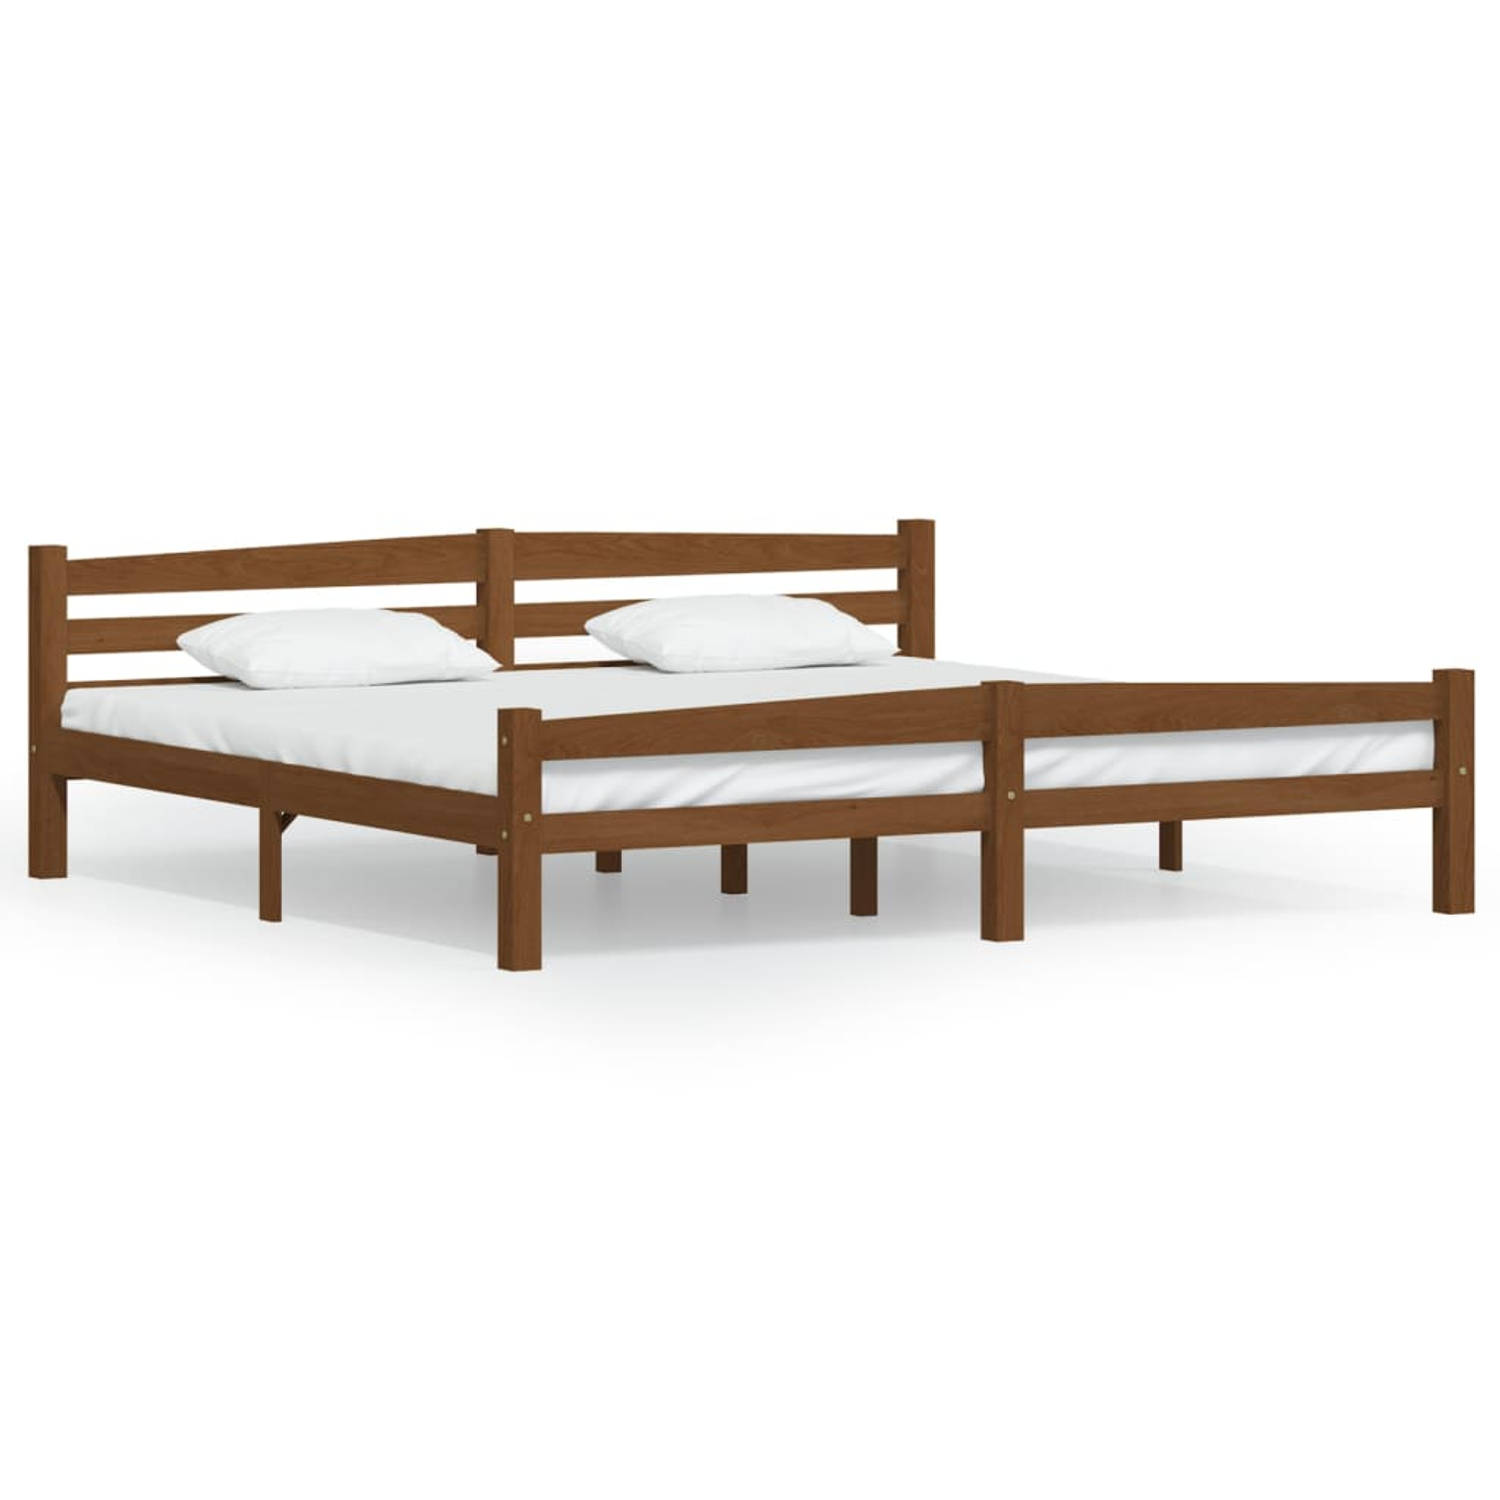 The Living Store Bedframe massief grenenhout honingbruin 200x200 cm - Bedframe - Bedframe - Bed Frame - Bed Frames - Bed - Bedden - 2-persoonsbed - 2-persoonsbedden - Tweepersoons